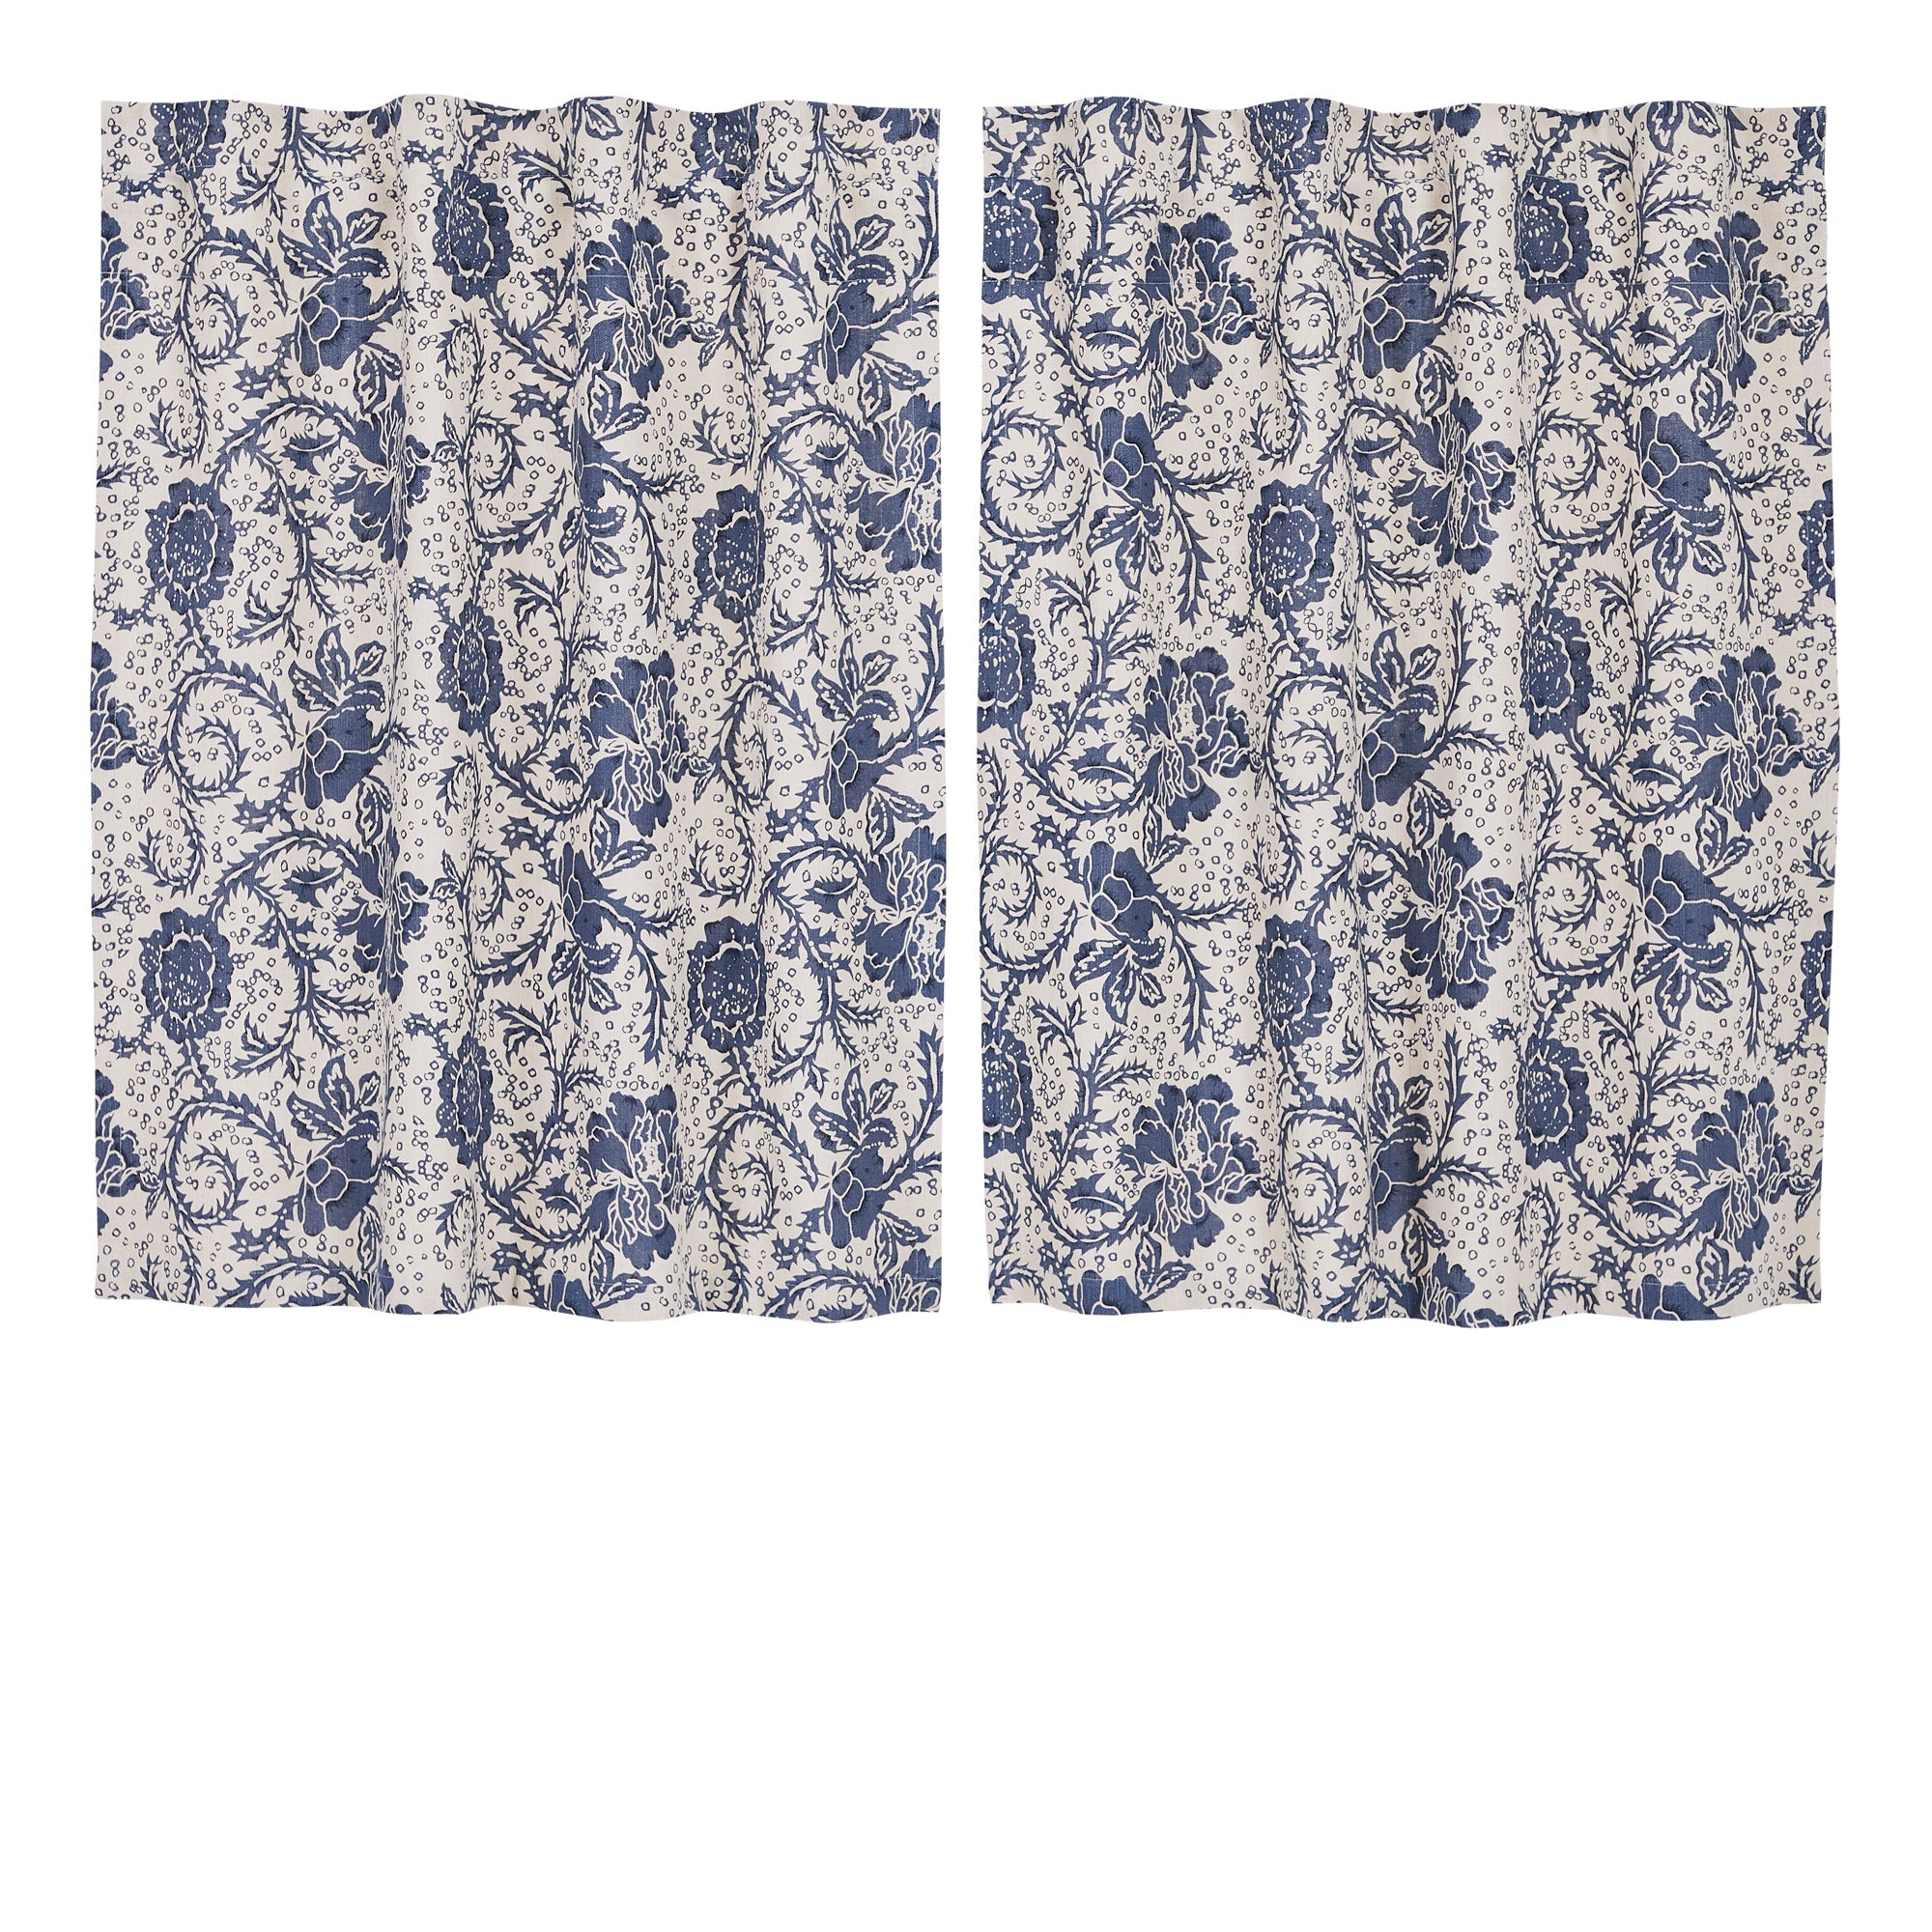 Dorset Navy Floral Tier Curtain Set of 2 L36xW36 VHC Brands